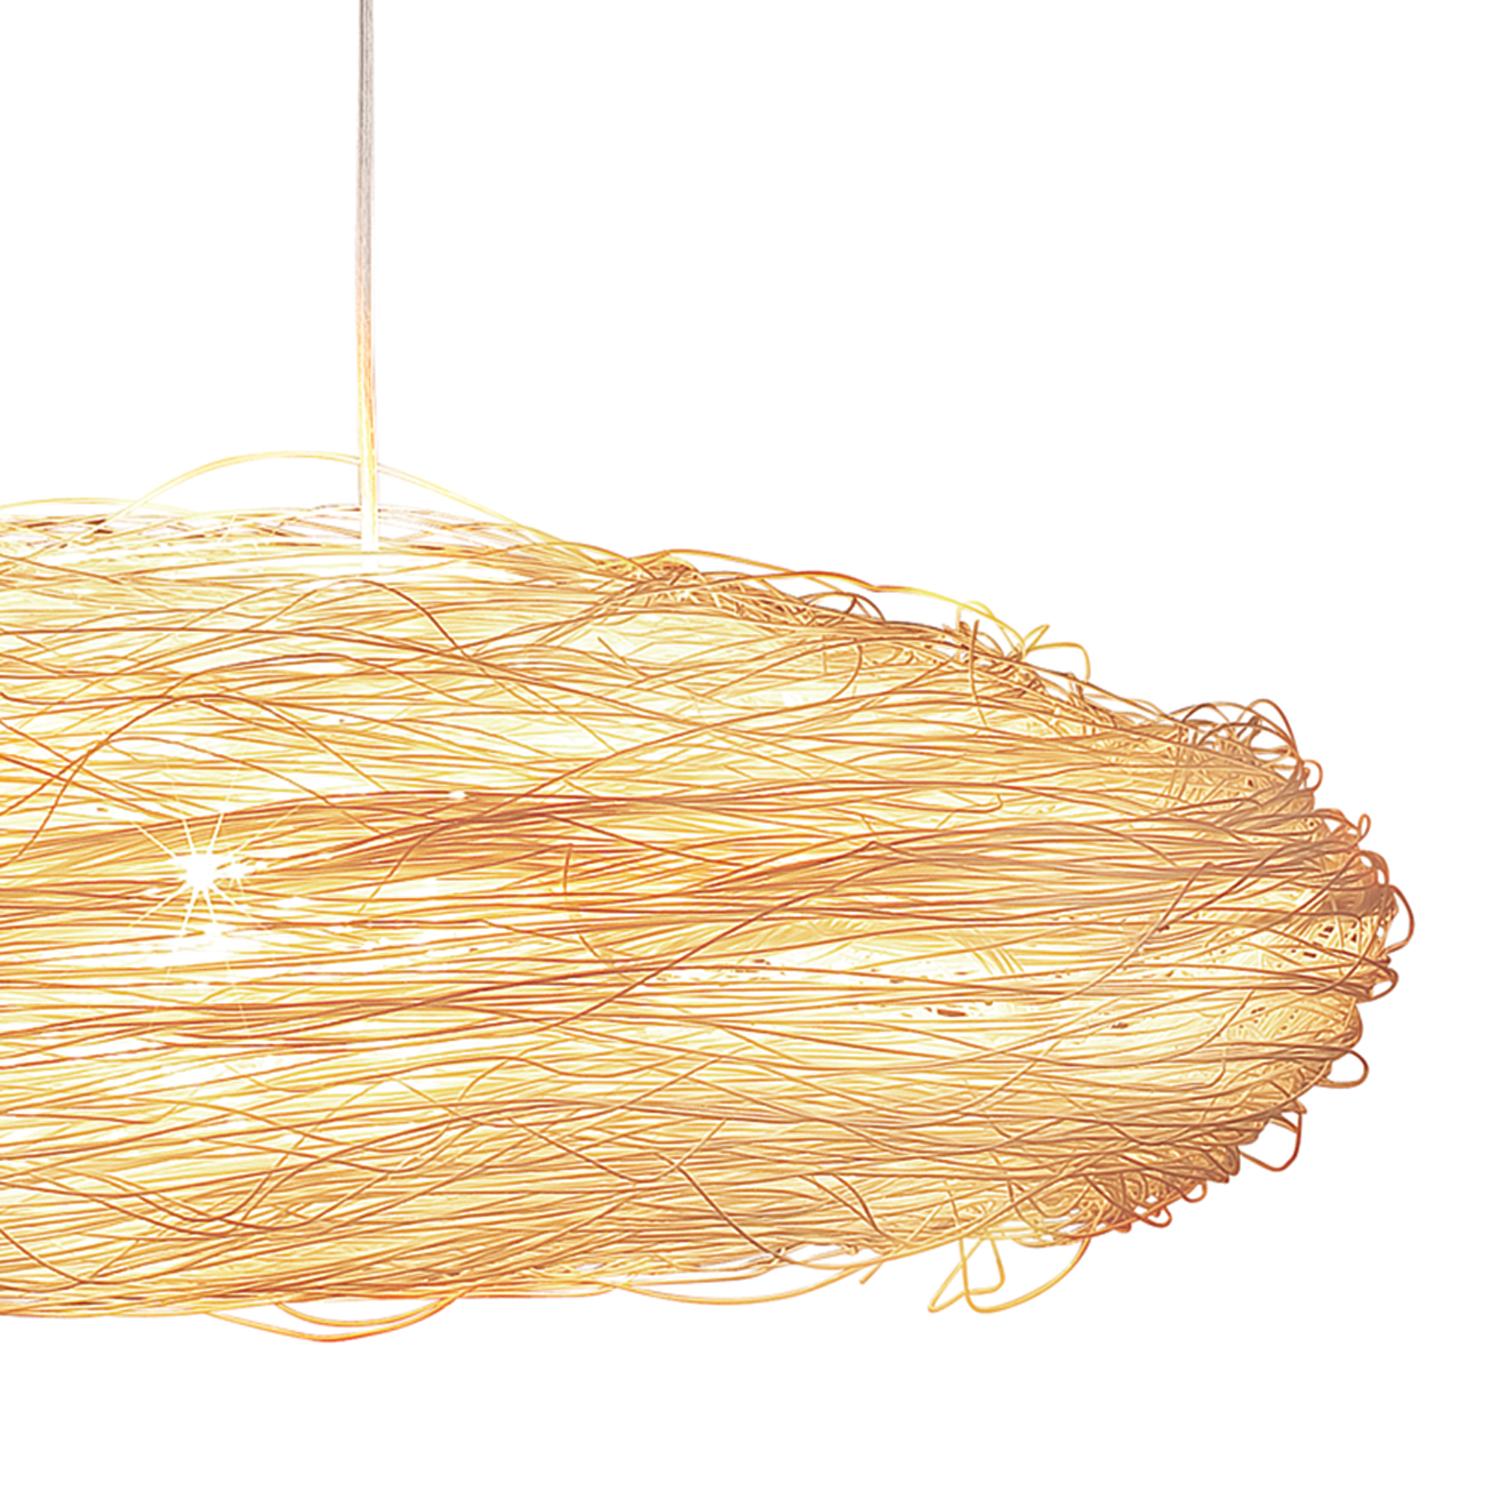 The pendant lamp diffuser is composed around a flattened tetrahydron structure, which is then clad with superfine extruded rattan, generating a warm and beautiful light quality. Hanging World pendant light by Ango has been used as bed side lamps,